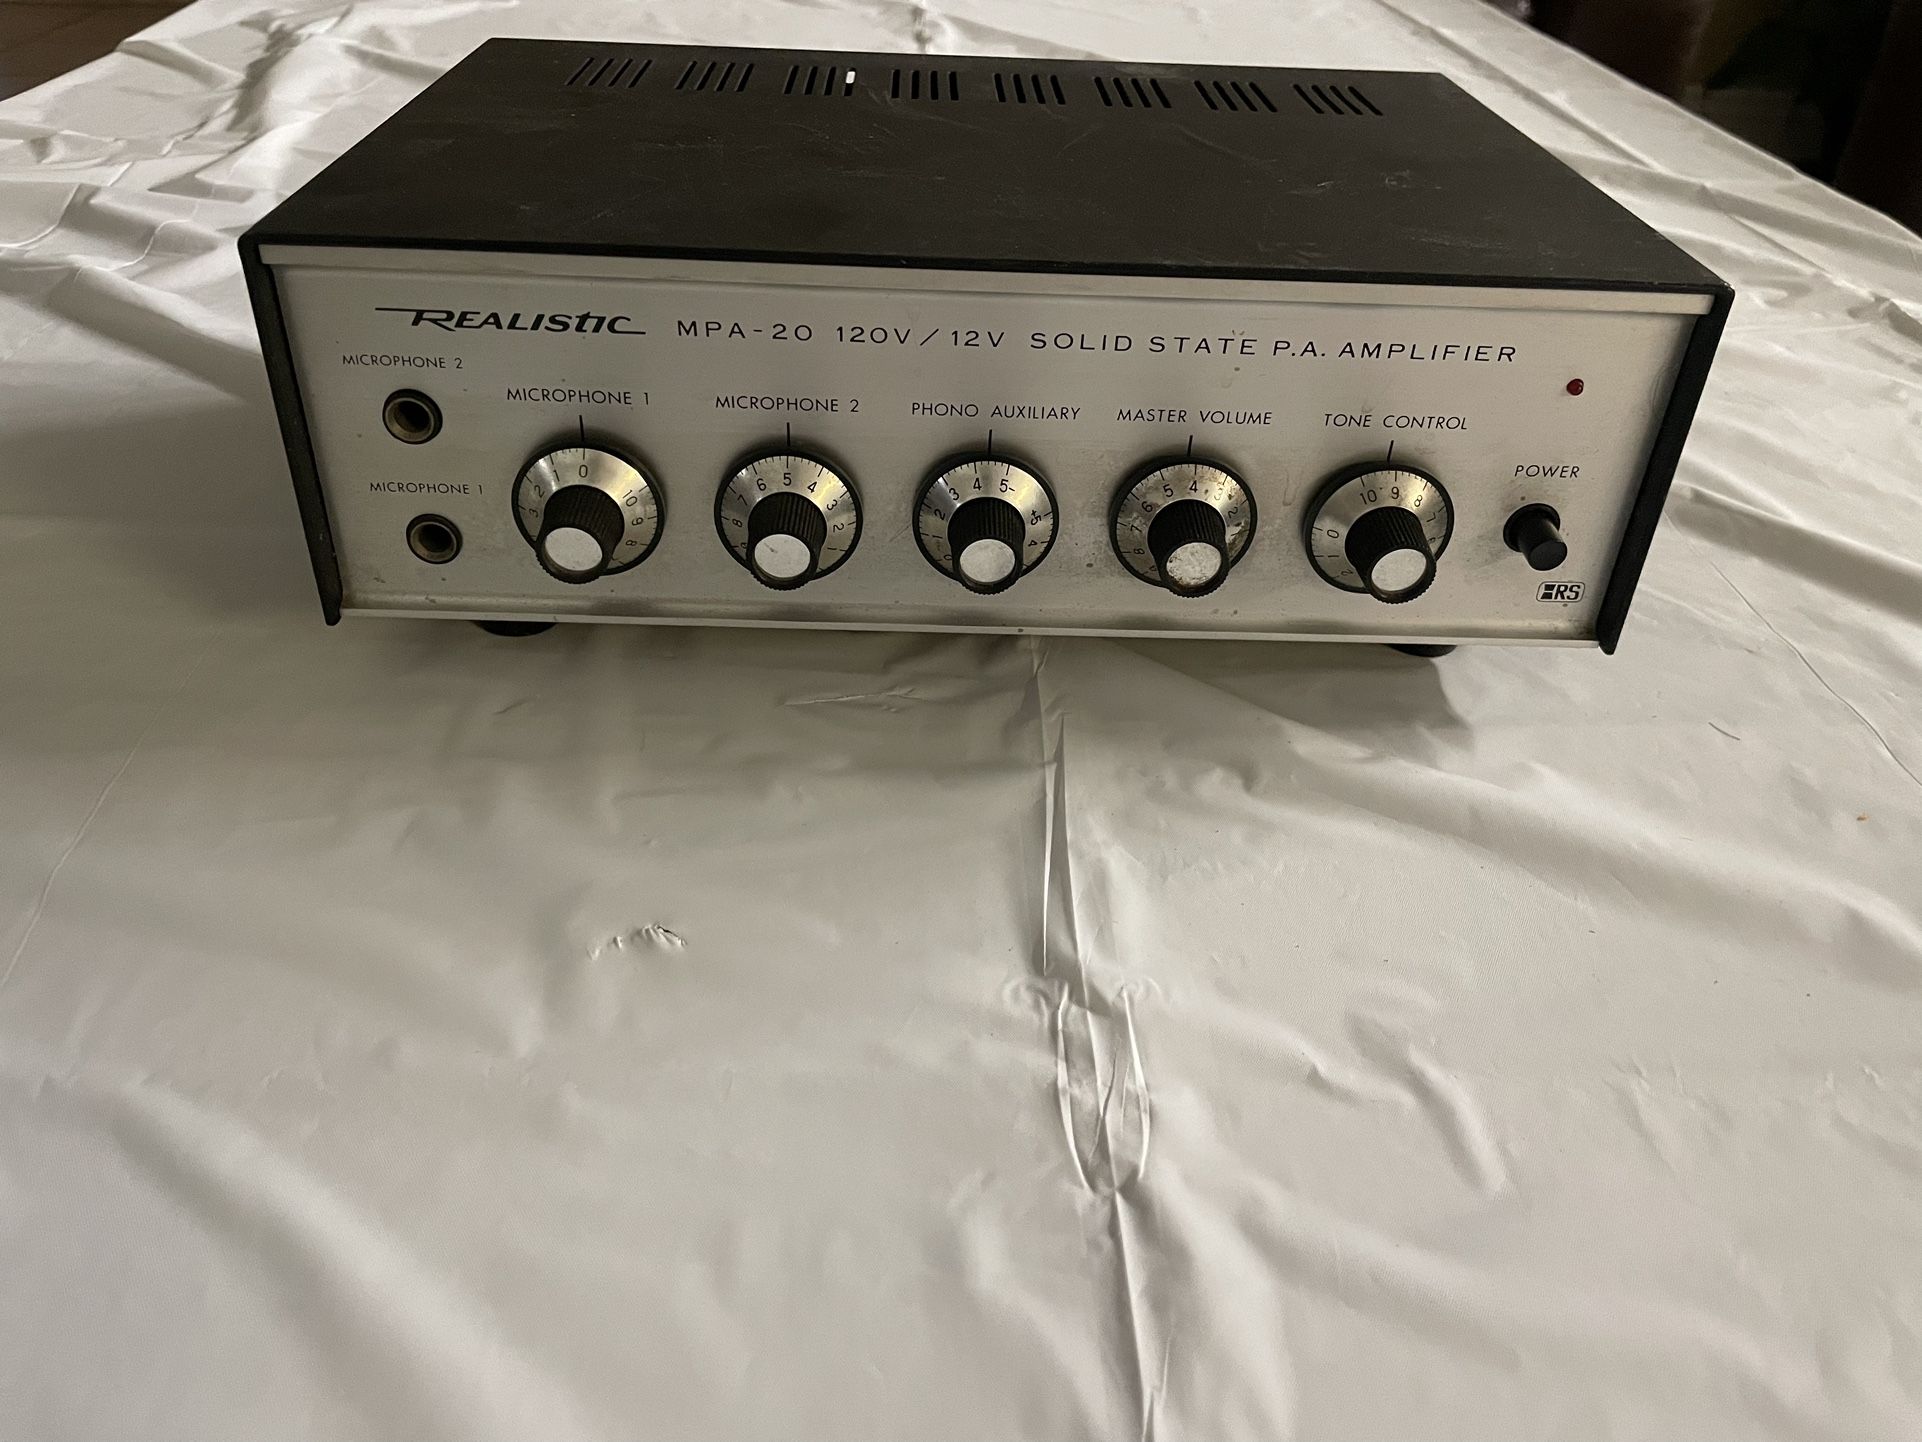 Realistic Mpa-20 Solid State 120v / 12v PA Amplifier